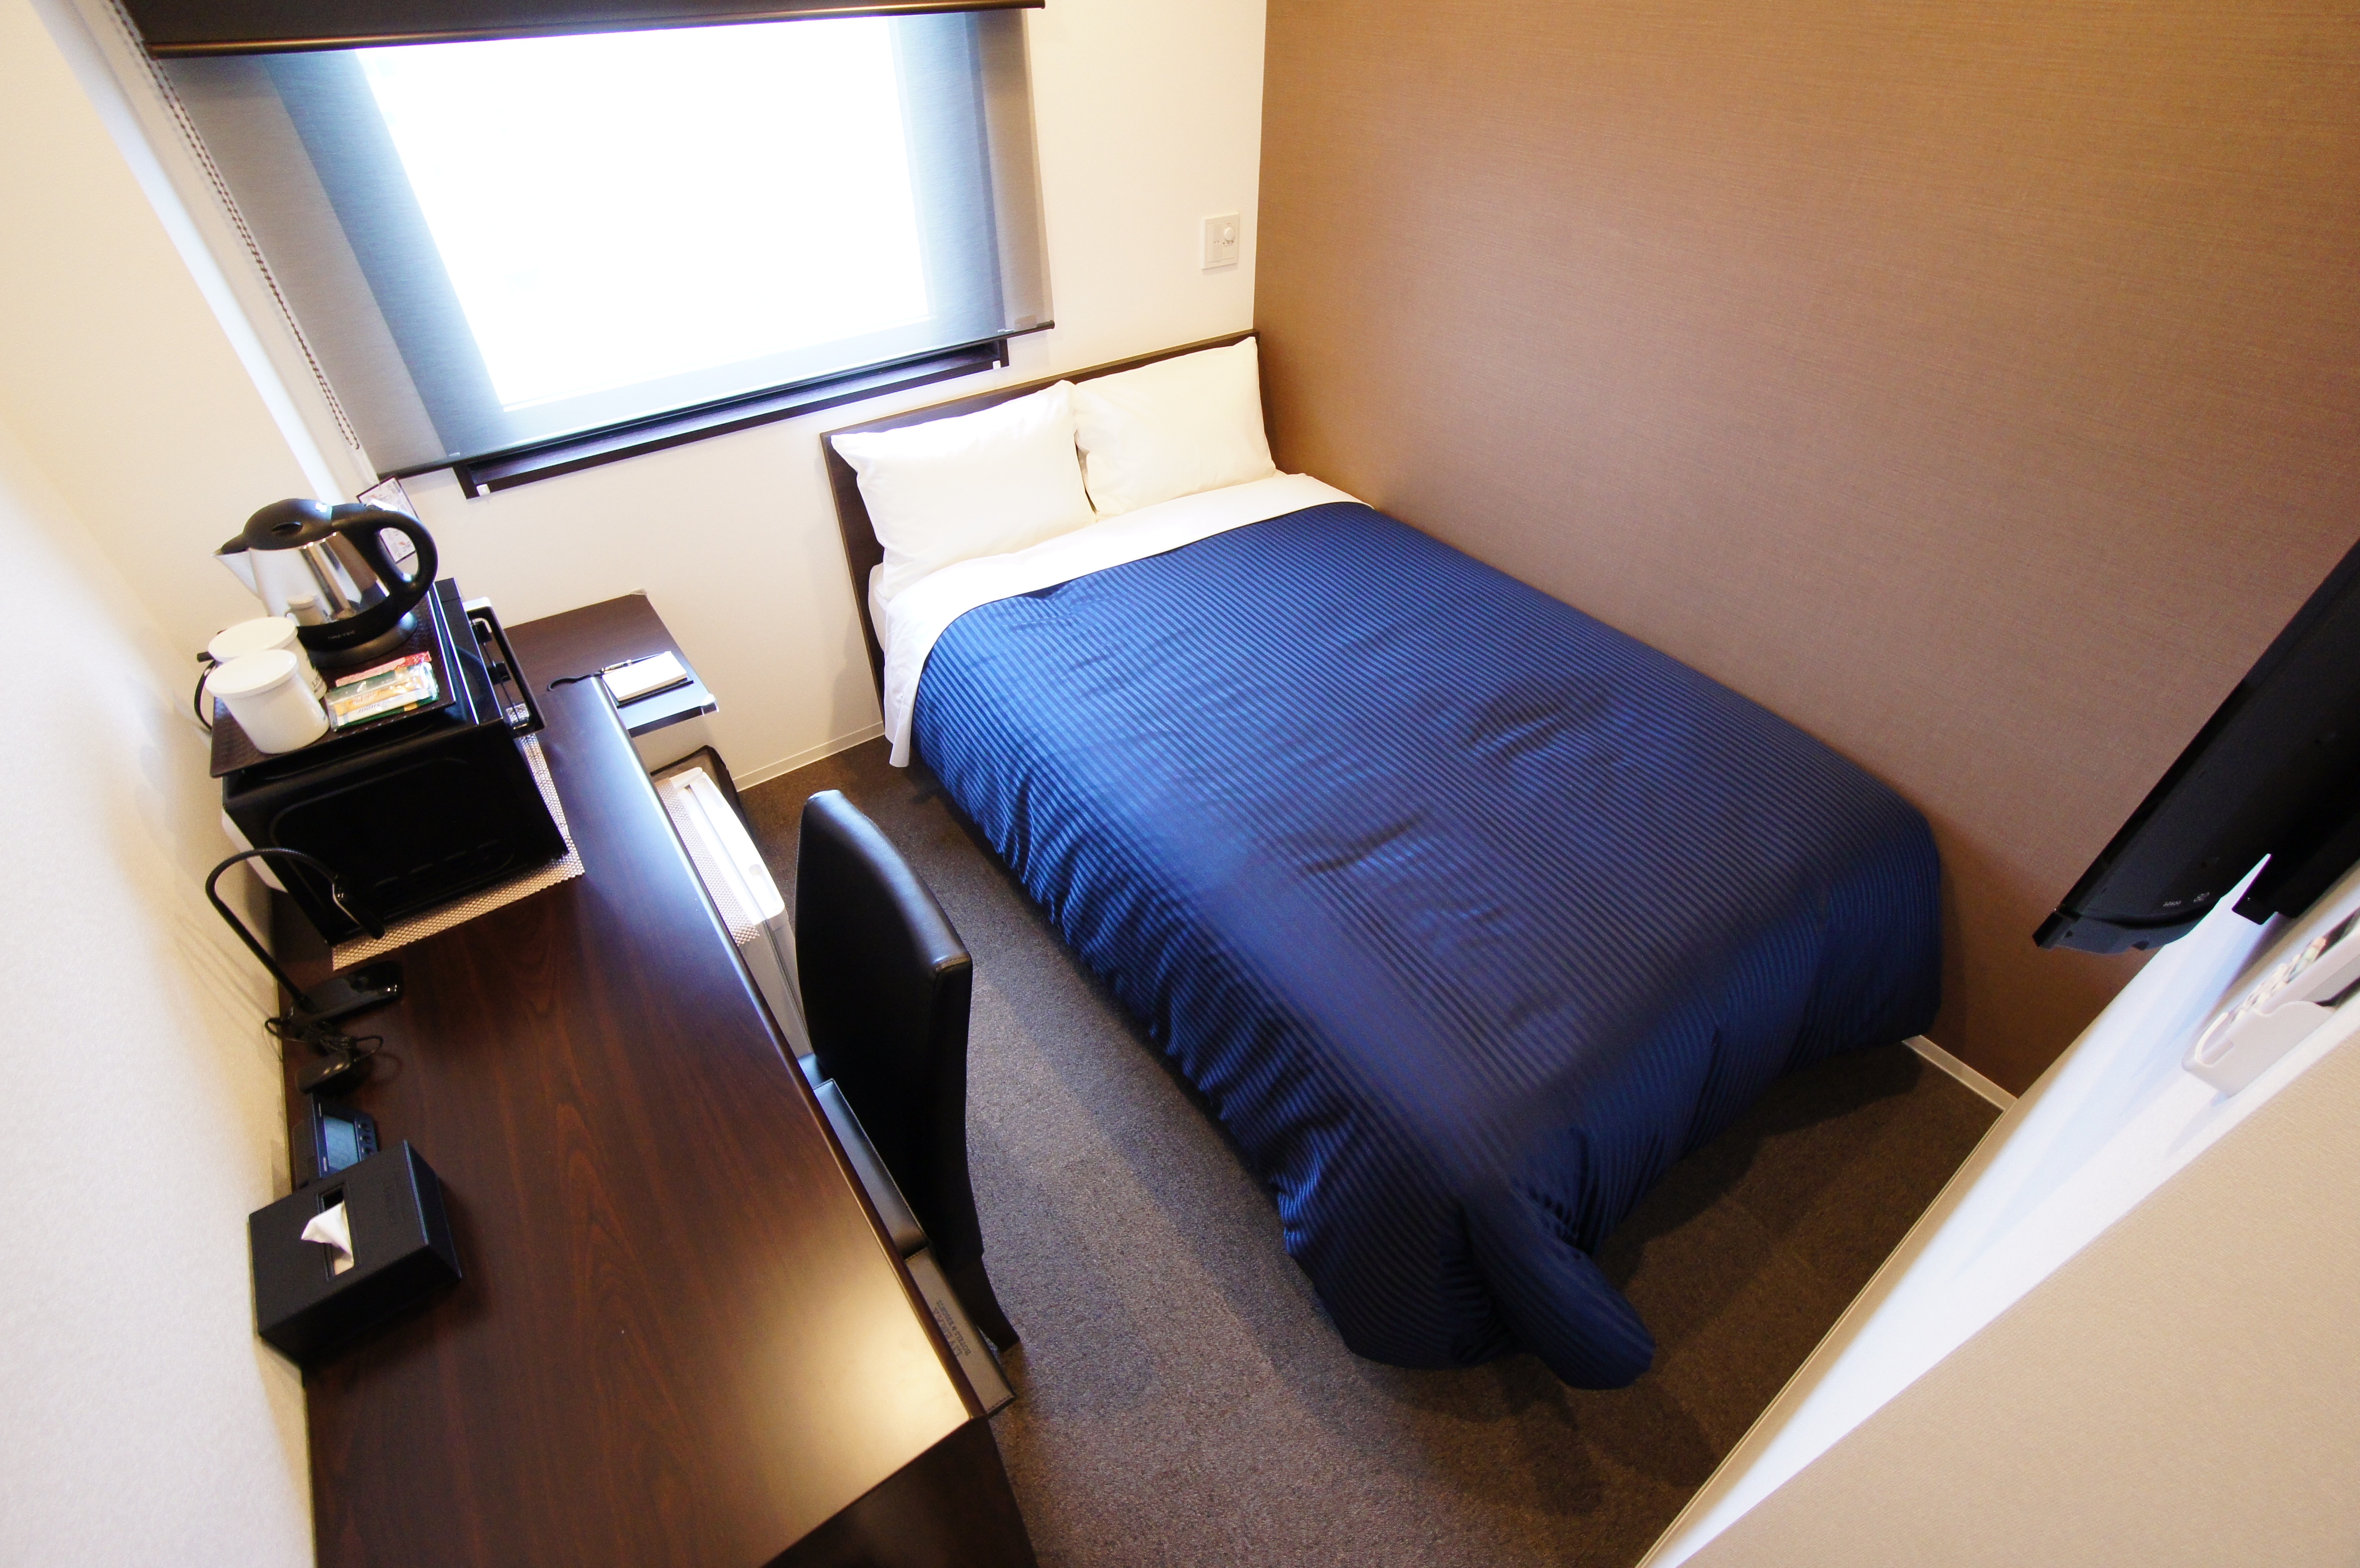 [Single room] Simmons semi-double bed is adopted.